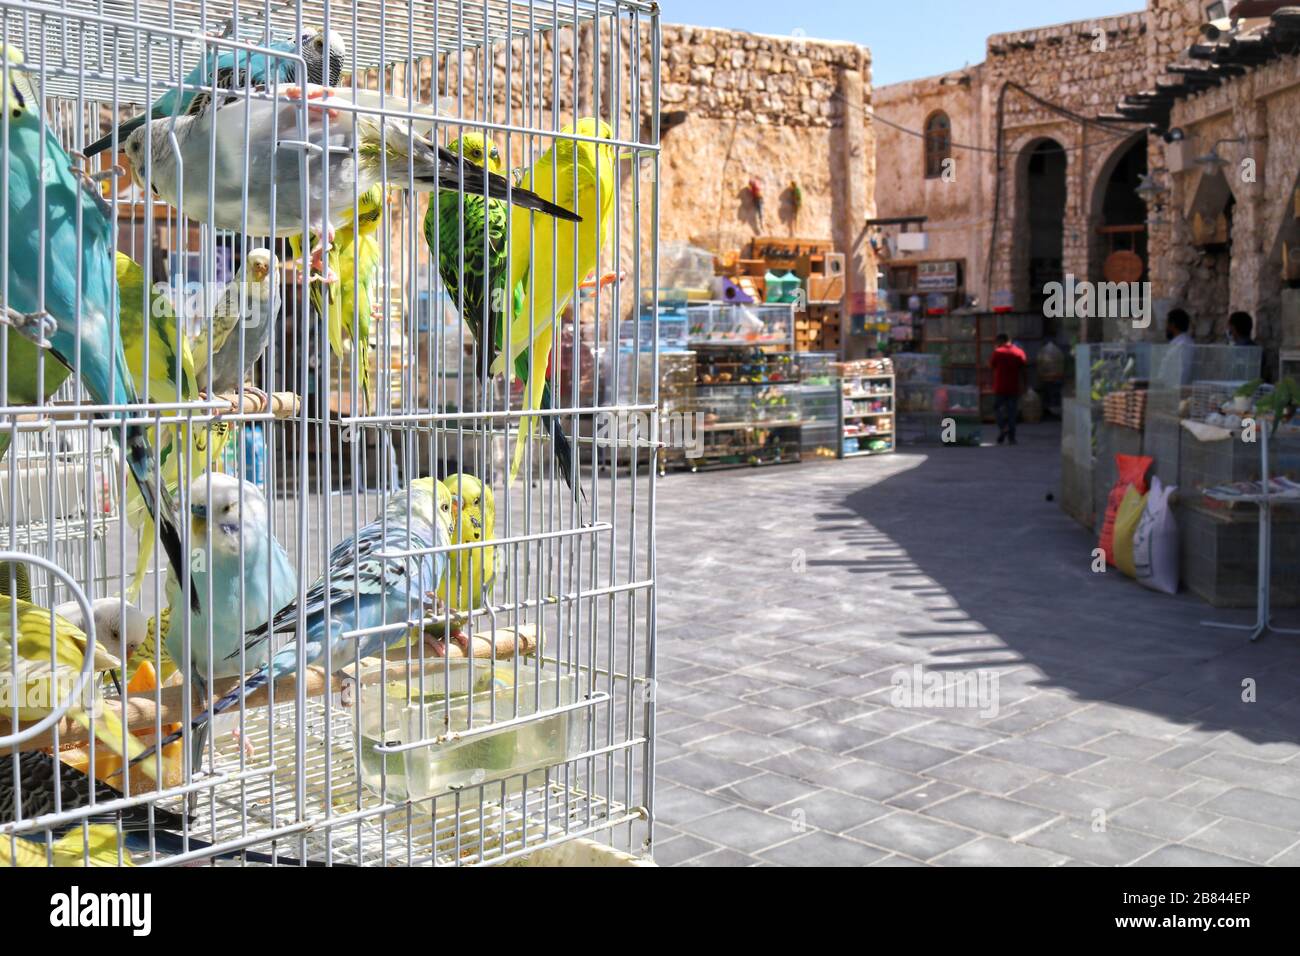 A view of Pet Market in Souq Waqif where one can find all the pets including birds - Doha, Qatar Stock Photo